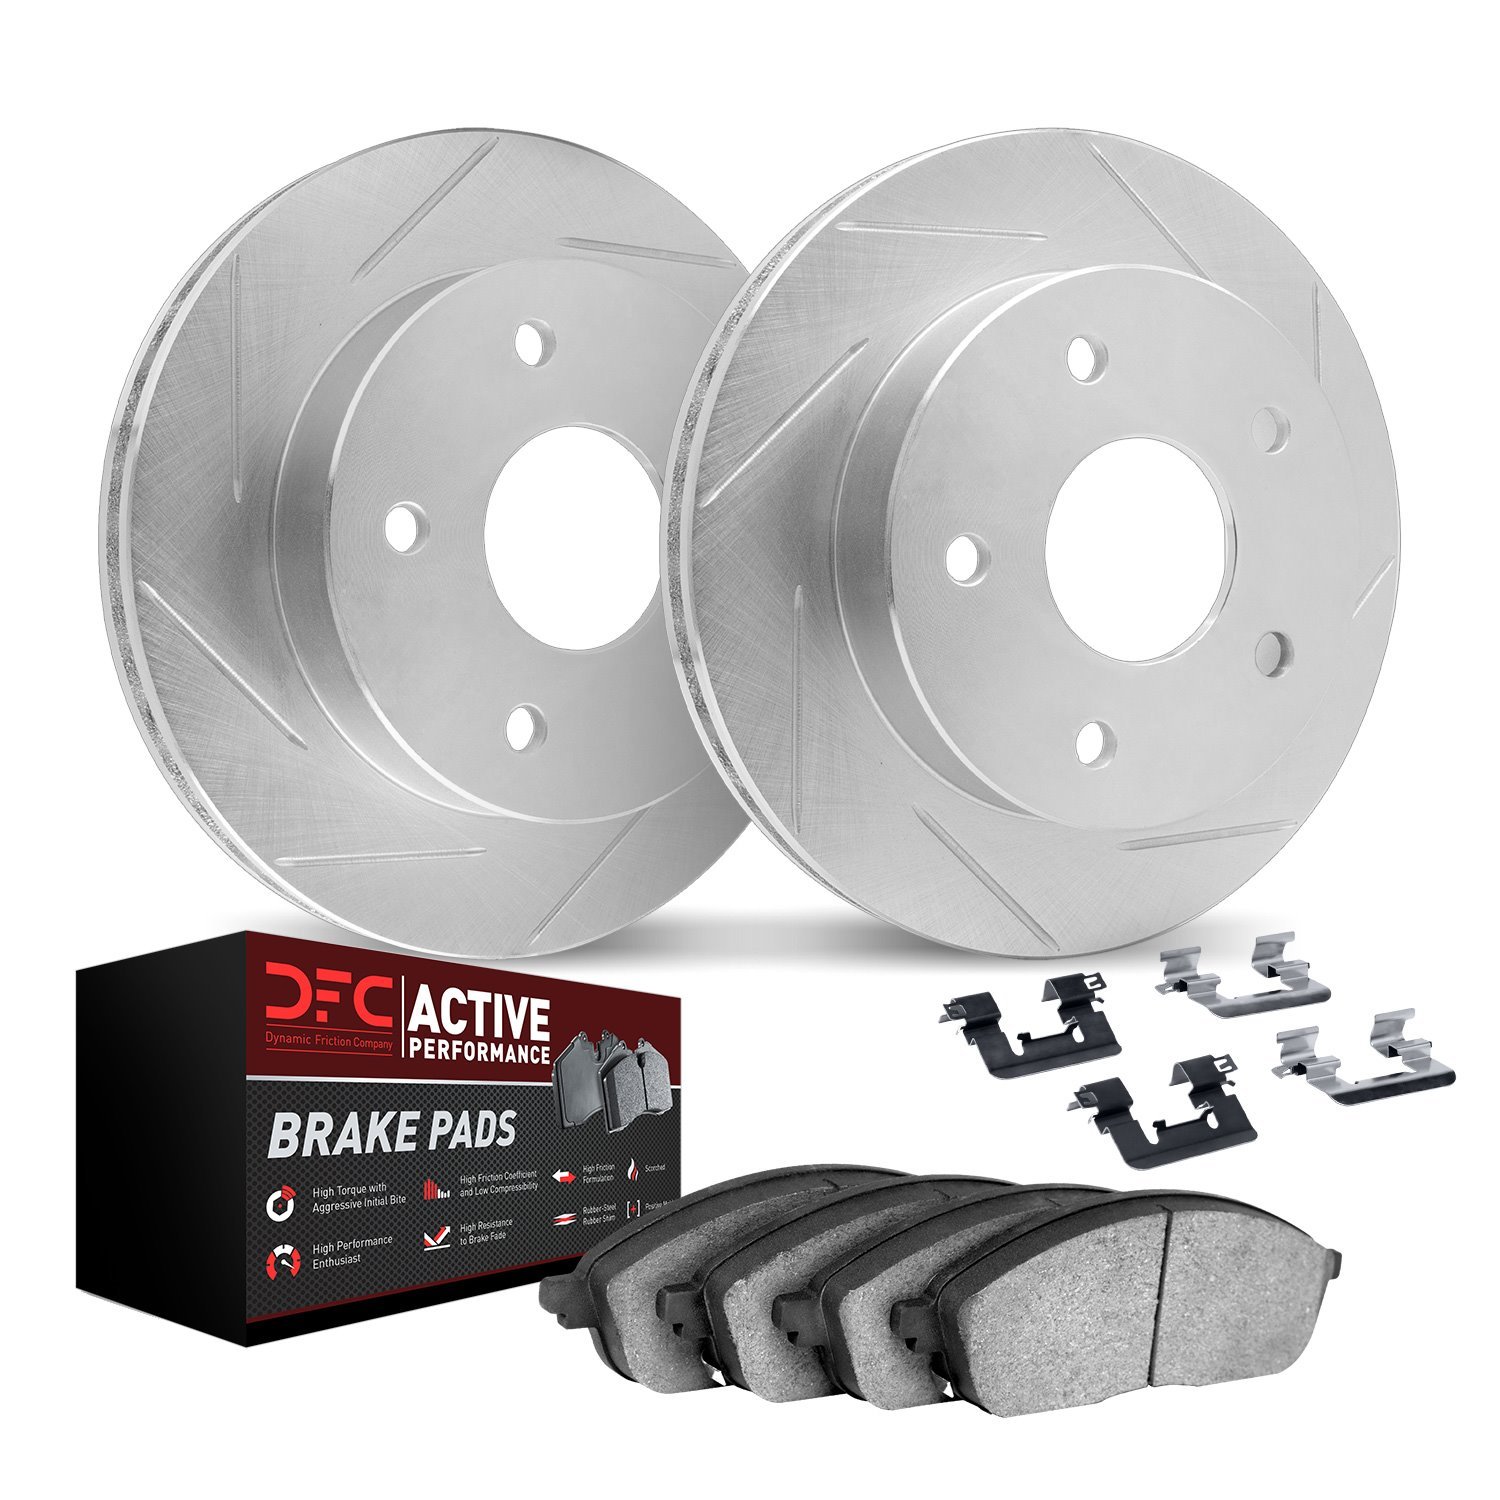 2712-54027 Geoperformance Slotted Brake Rotors with Active Performance Pads Kits & Hardware, 2005-2010 Ford/Lincoln/Mercury/Mazd